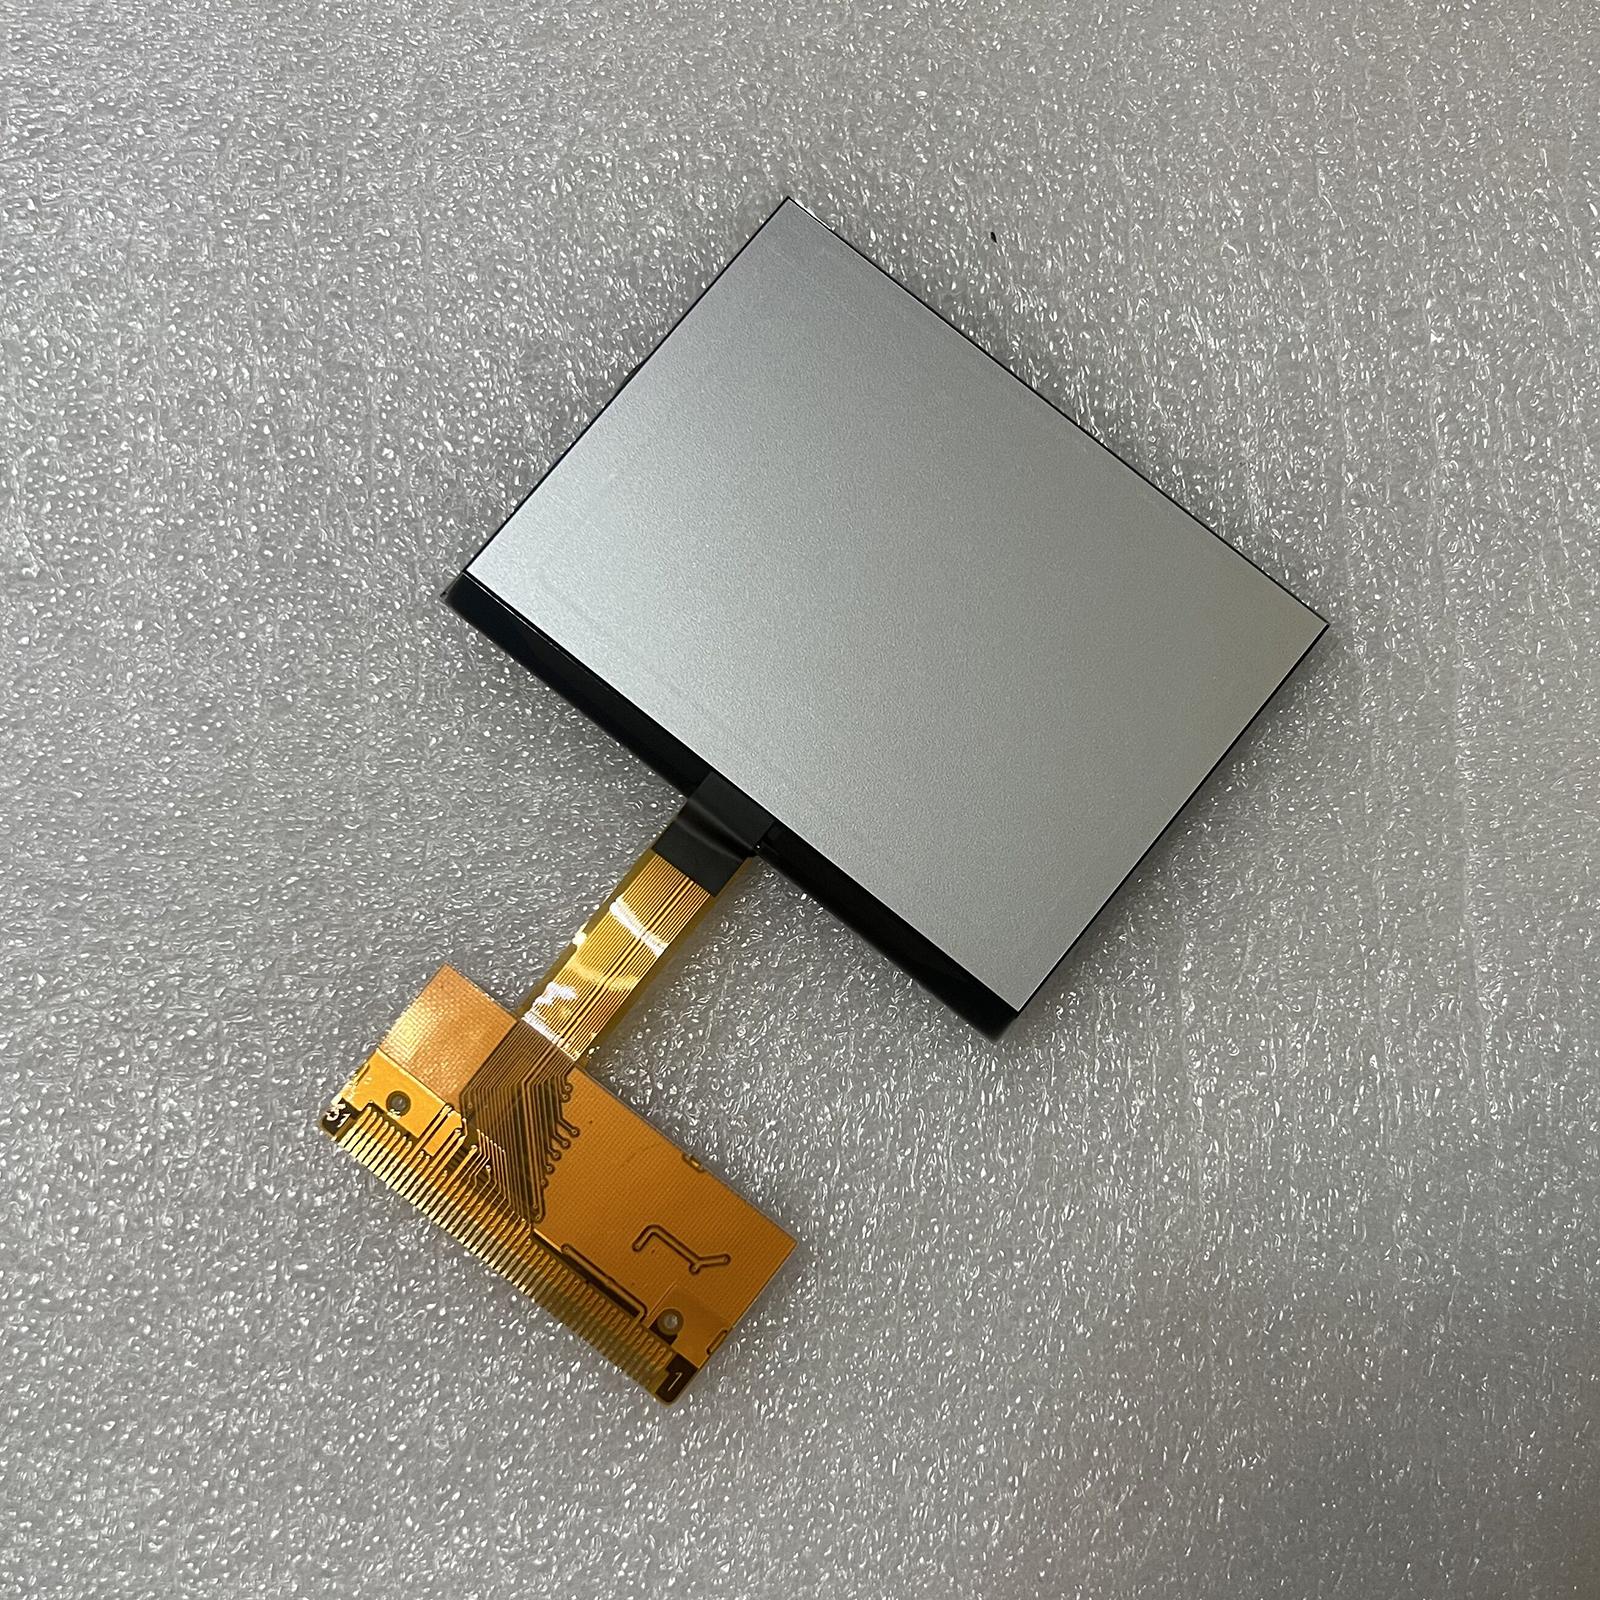 LCD Display Replacement Automotive Accessories for Audi a3 A4